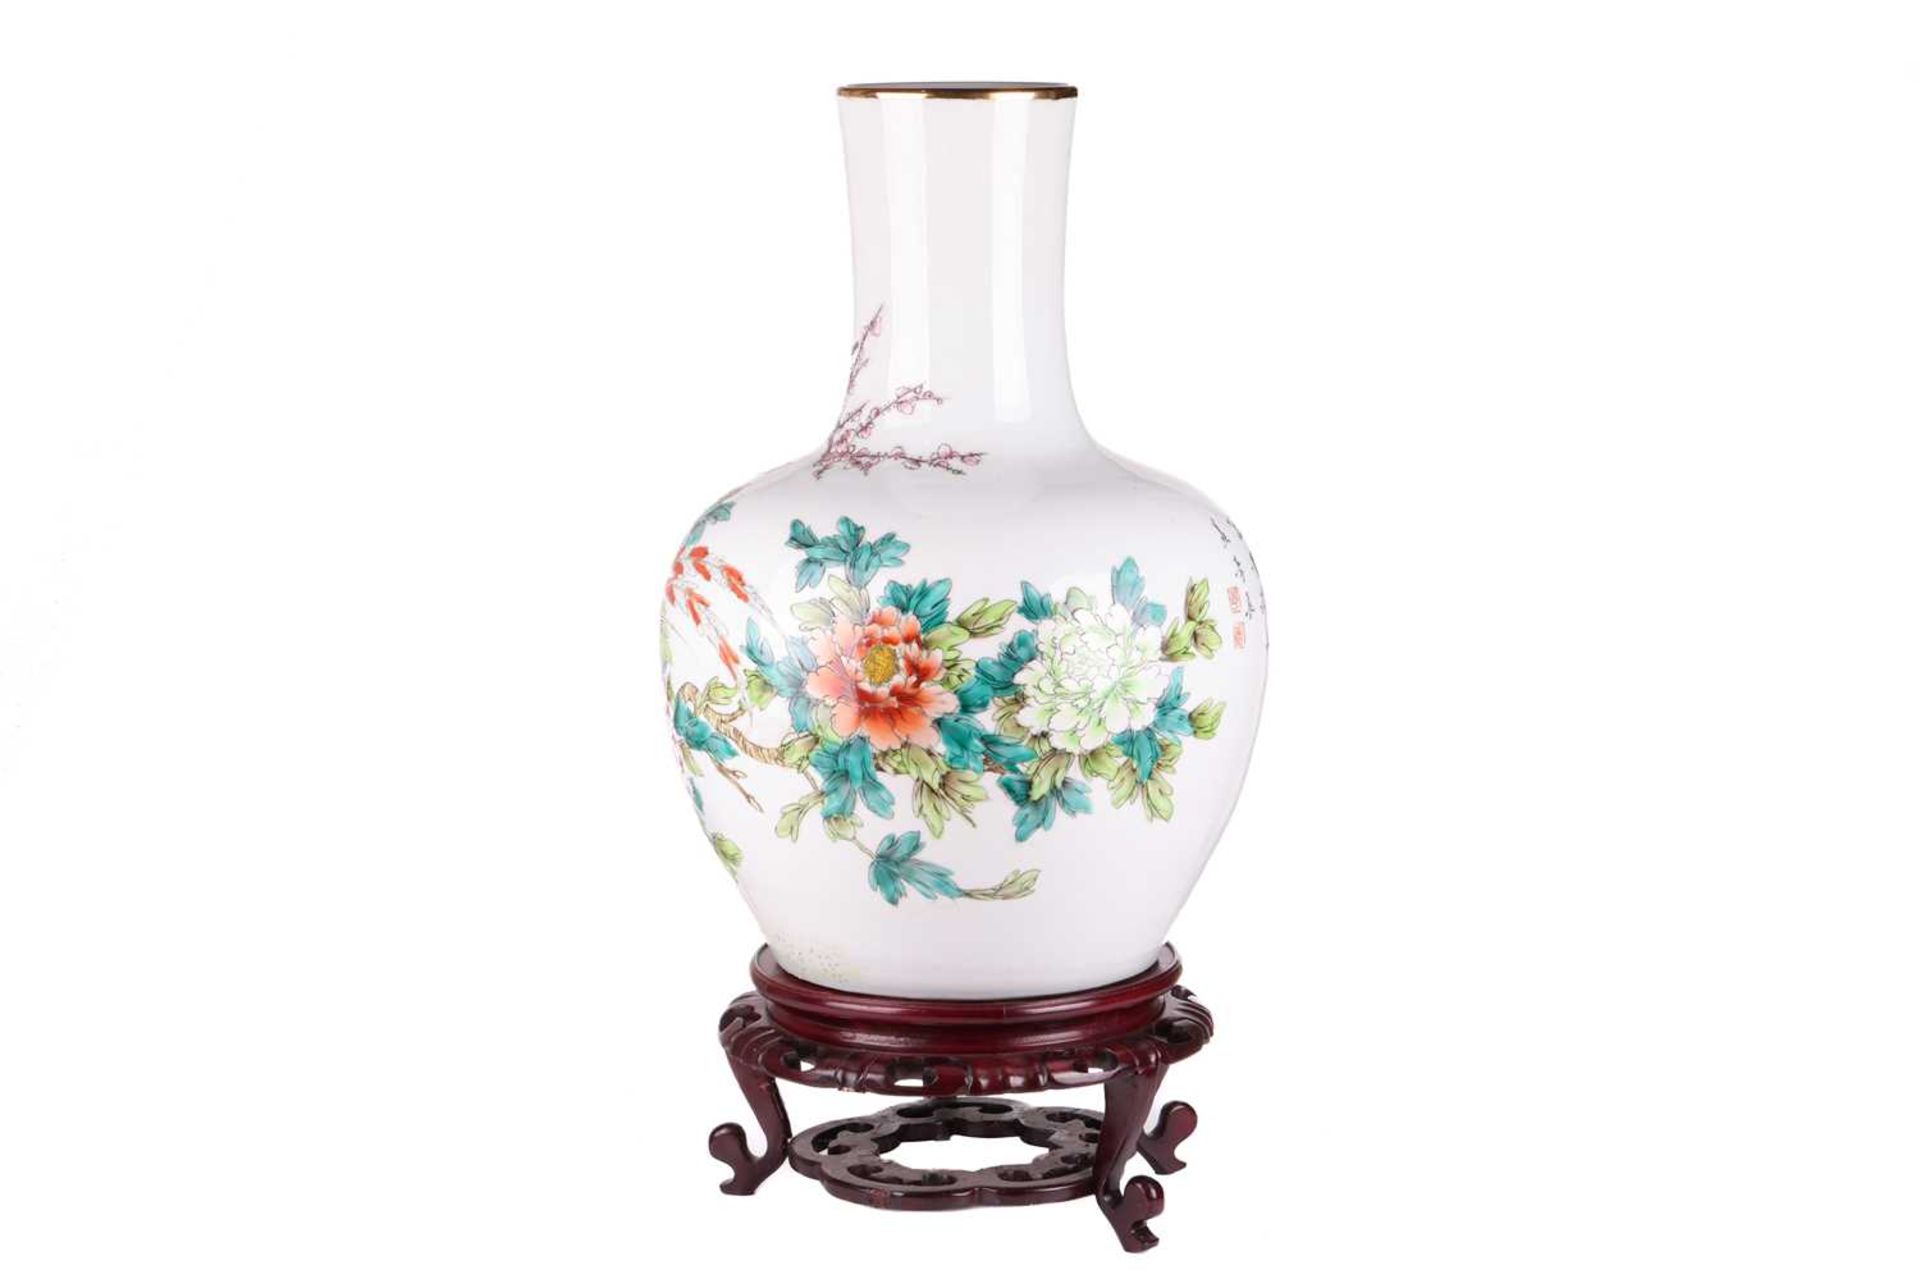 A large 18th-century style Chinese porcelain famille rose heavy baluster vase, 20th-century, with pe - Image 2 of 5